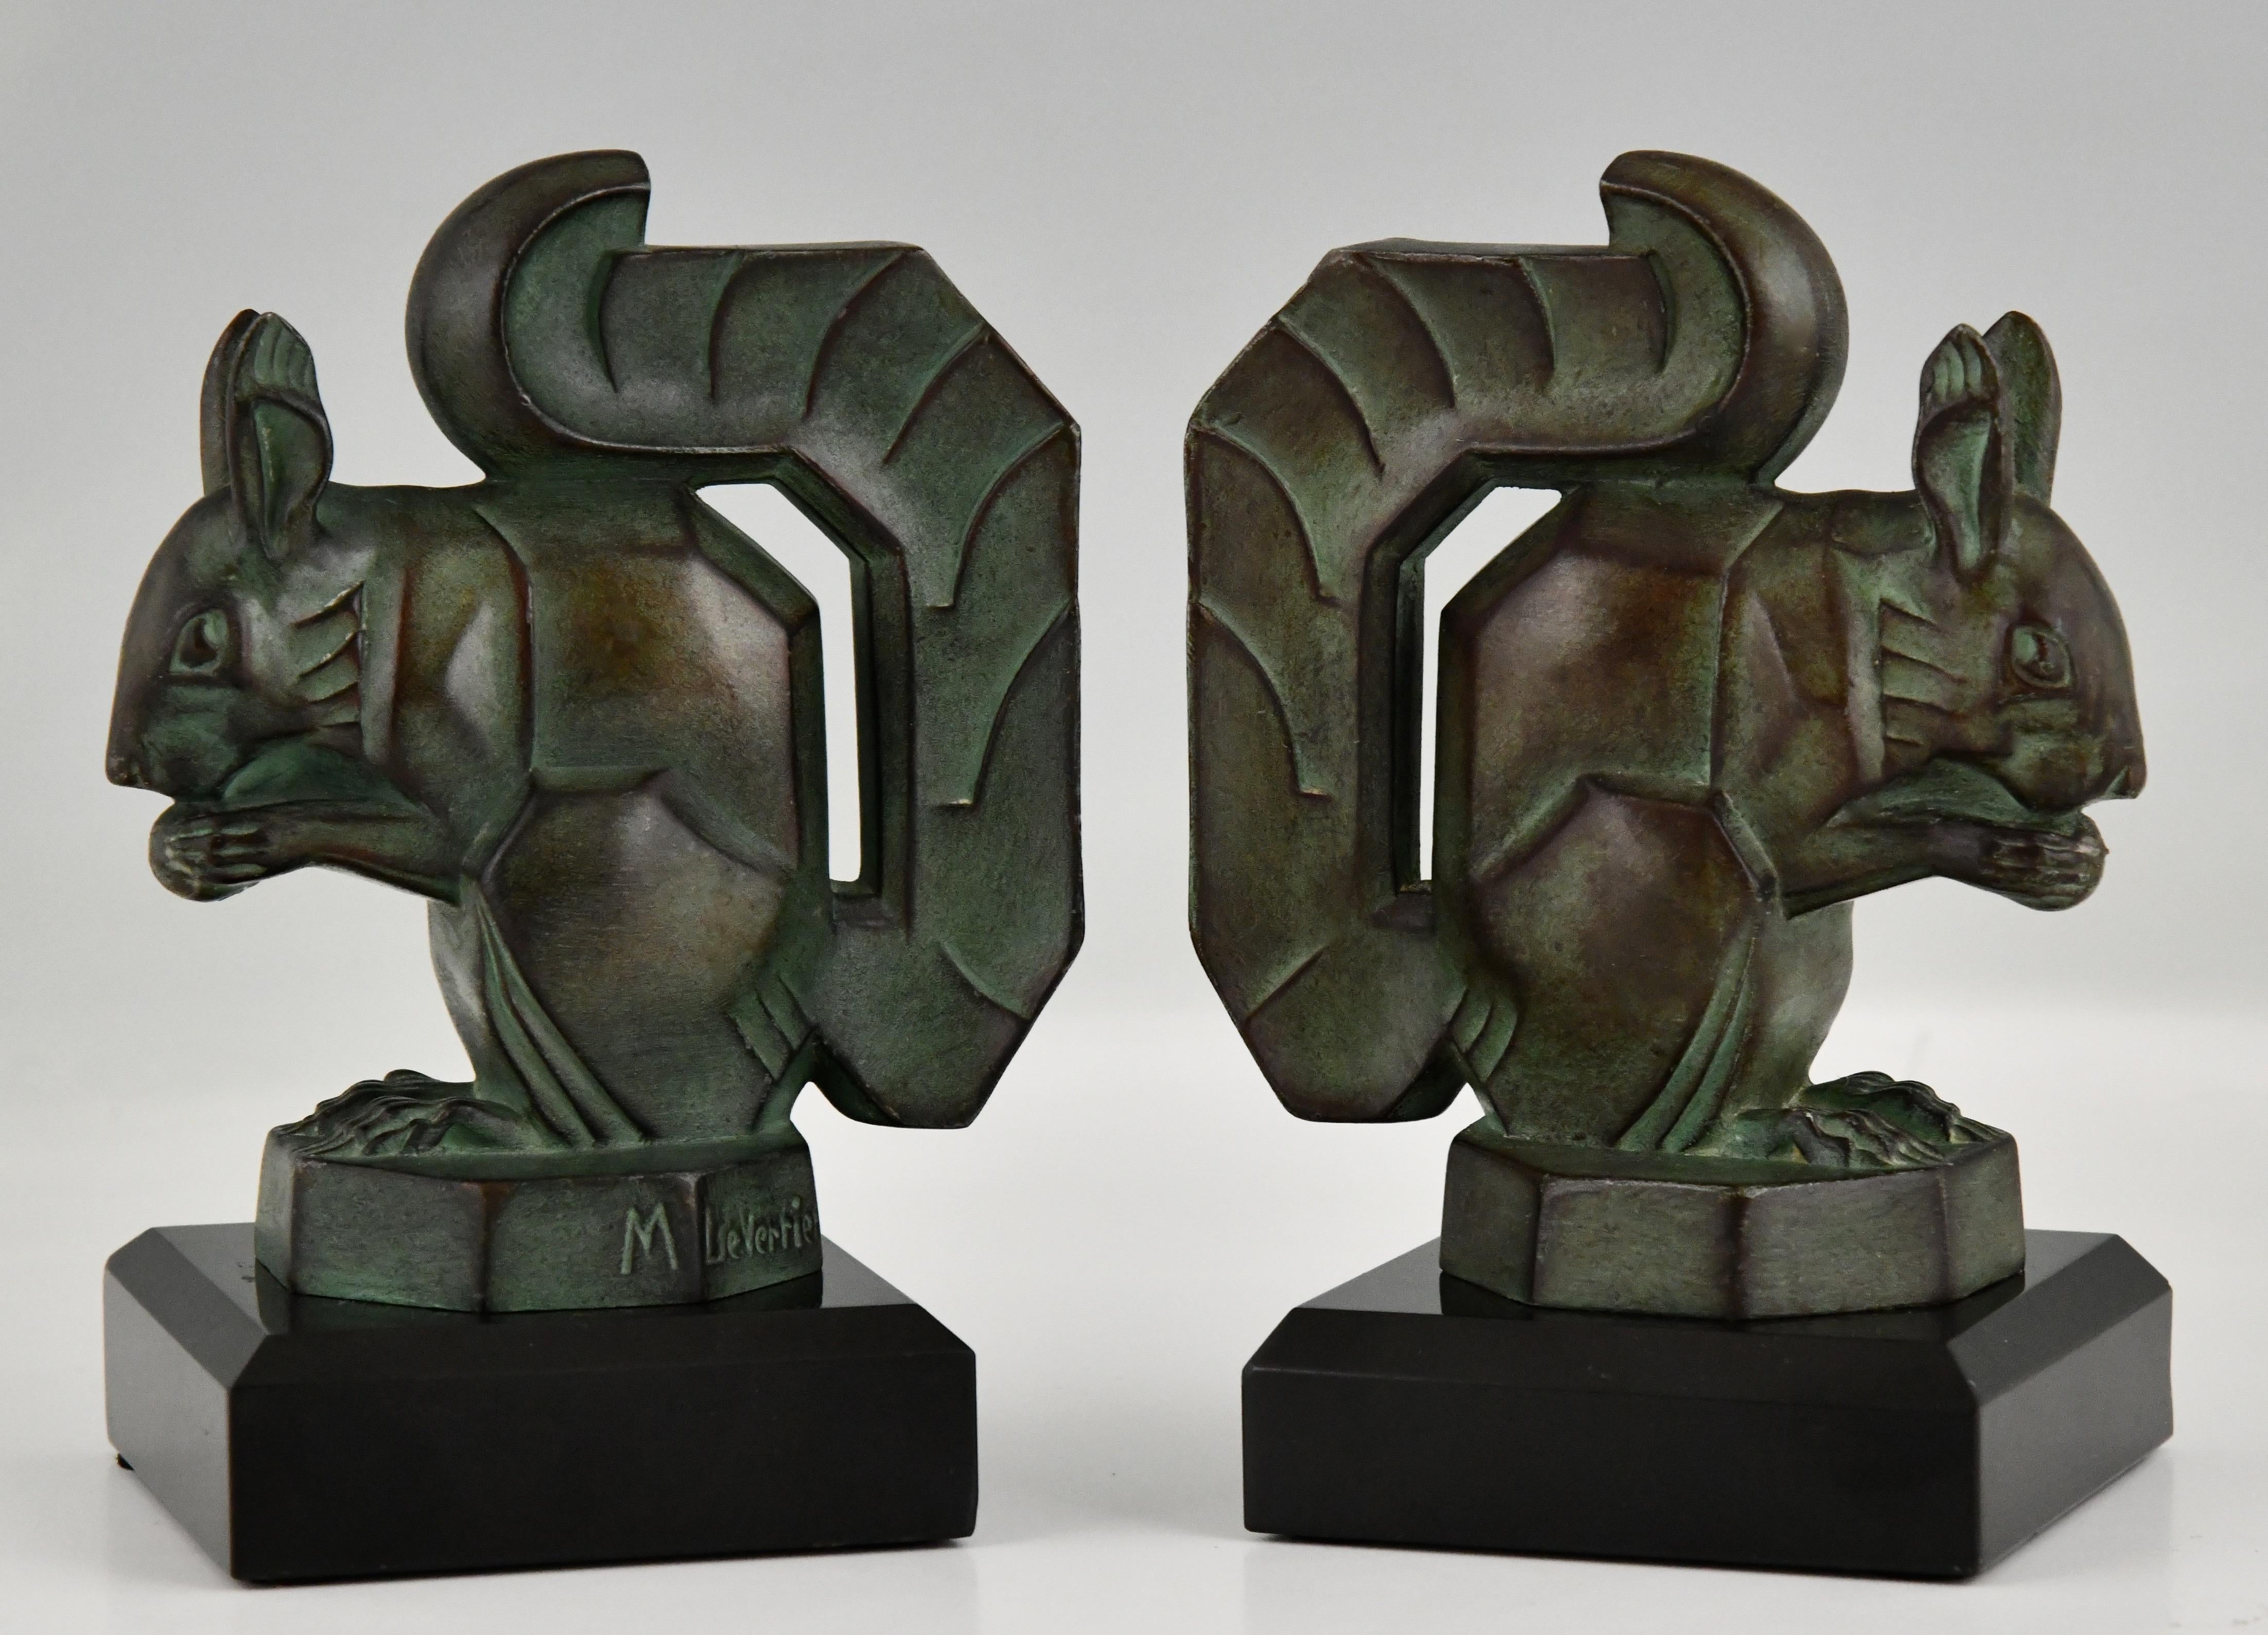 Art Deco squirrel bookends by Max Le Verrier
Art metal, dark green patina.
Belgian Black marble bases.
France 1930.
Literature:
Art Deco sculpture by Victor Arwas, Academy.
Bronzes, sculptors and founders by H. Berman, Abage.
Dictionnaire des